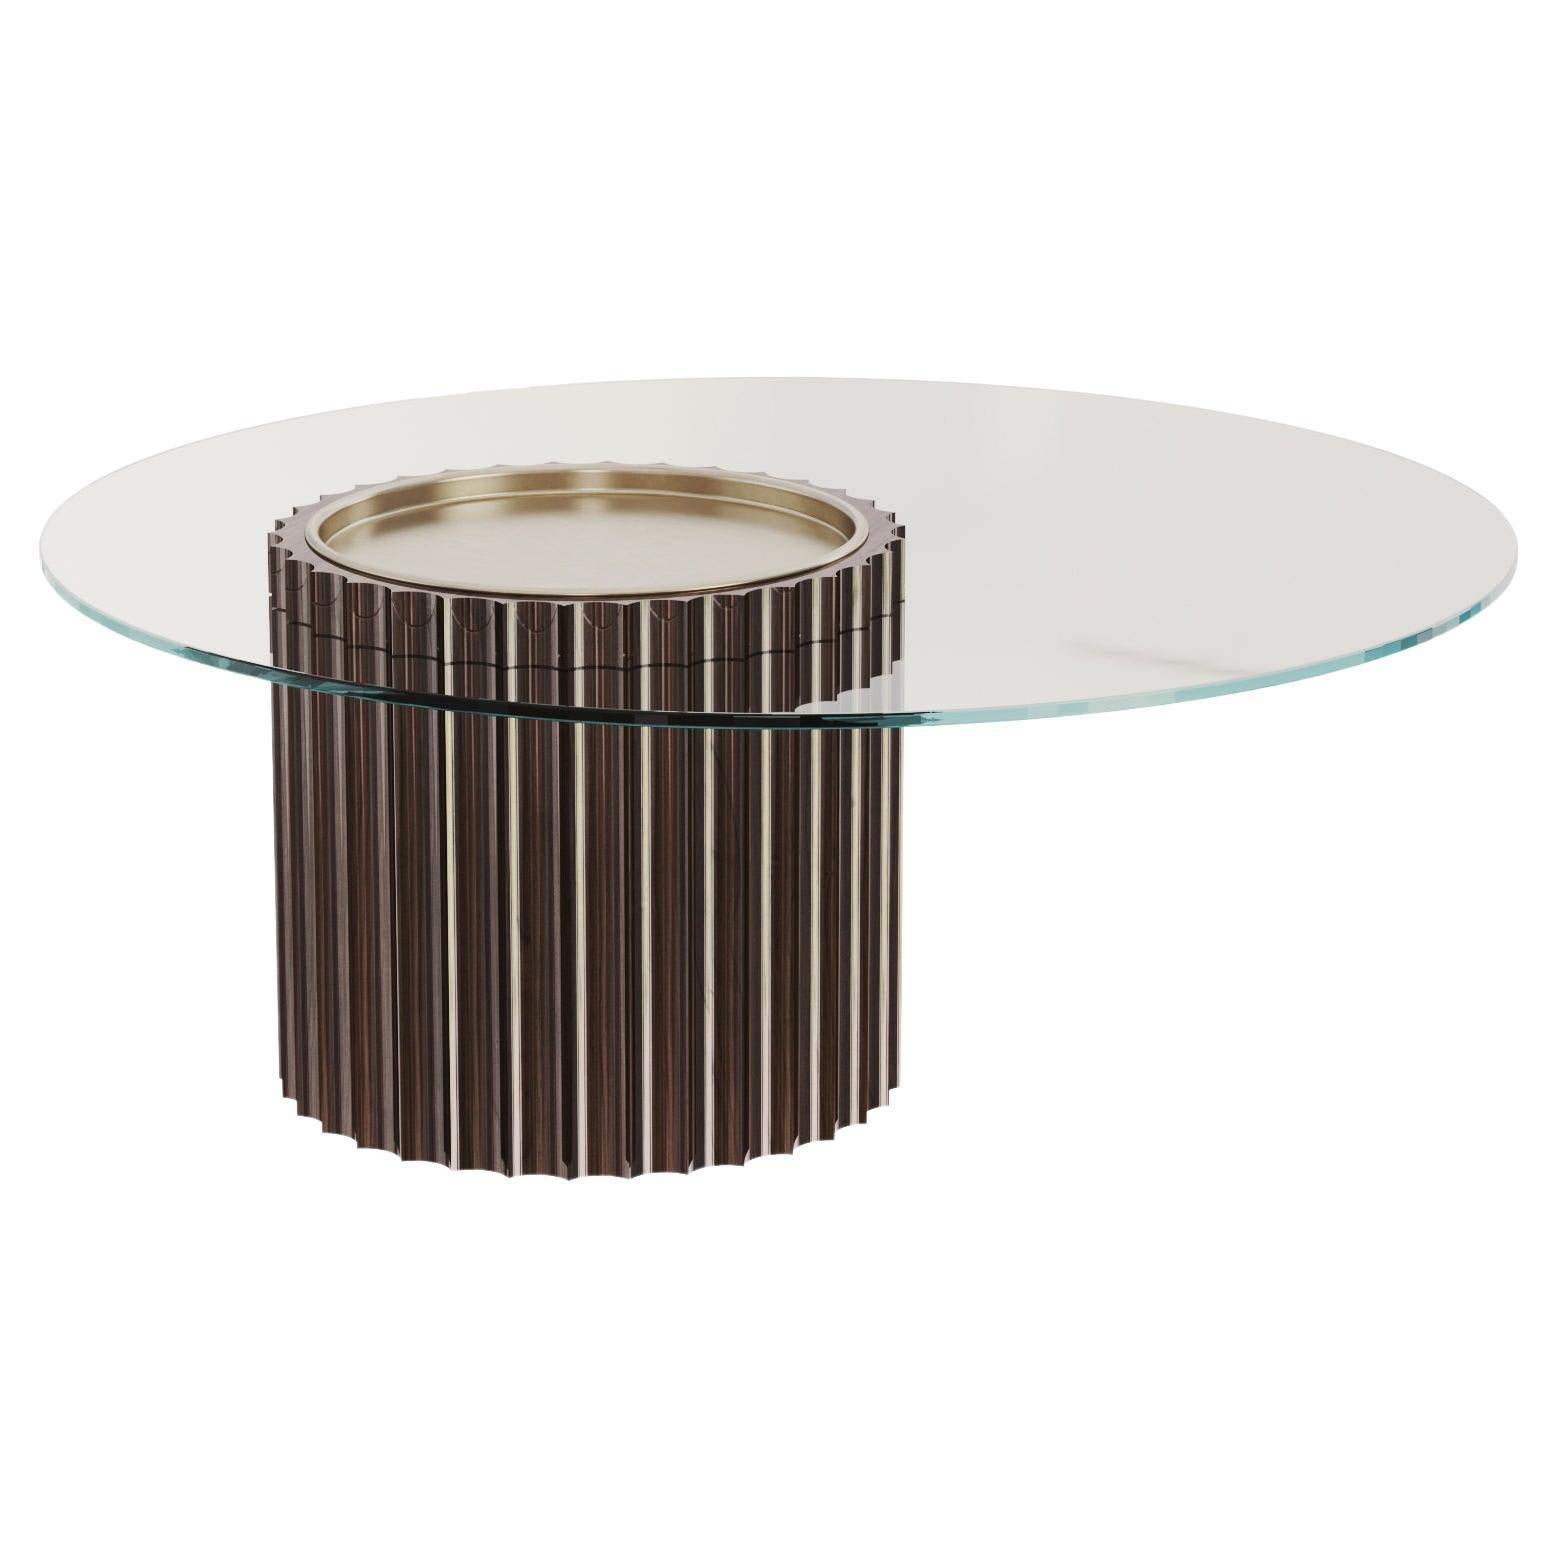 Modern Art Deco Side Table in Lacquered Dark Wood with Glass Top Ø 100cm For Sale